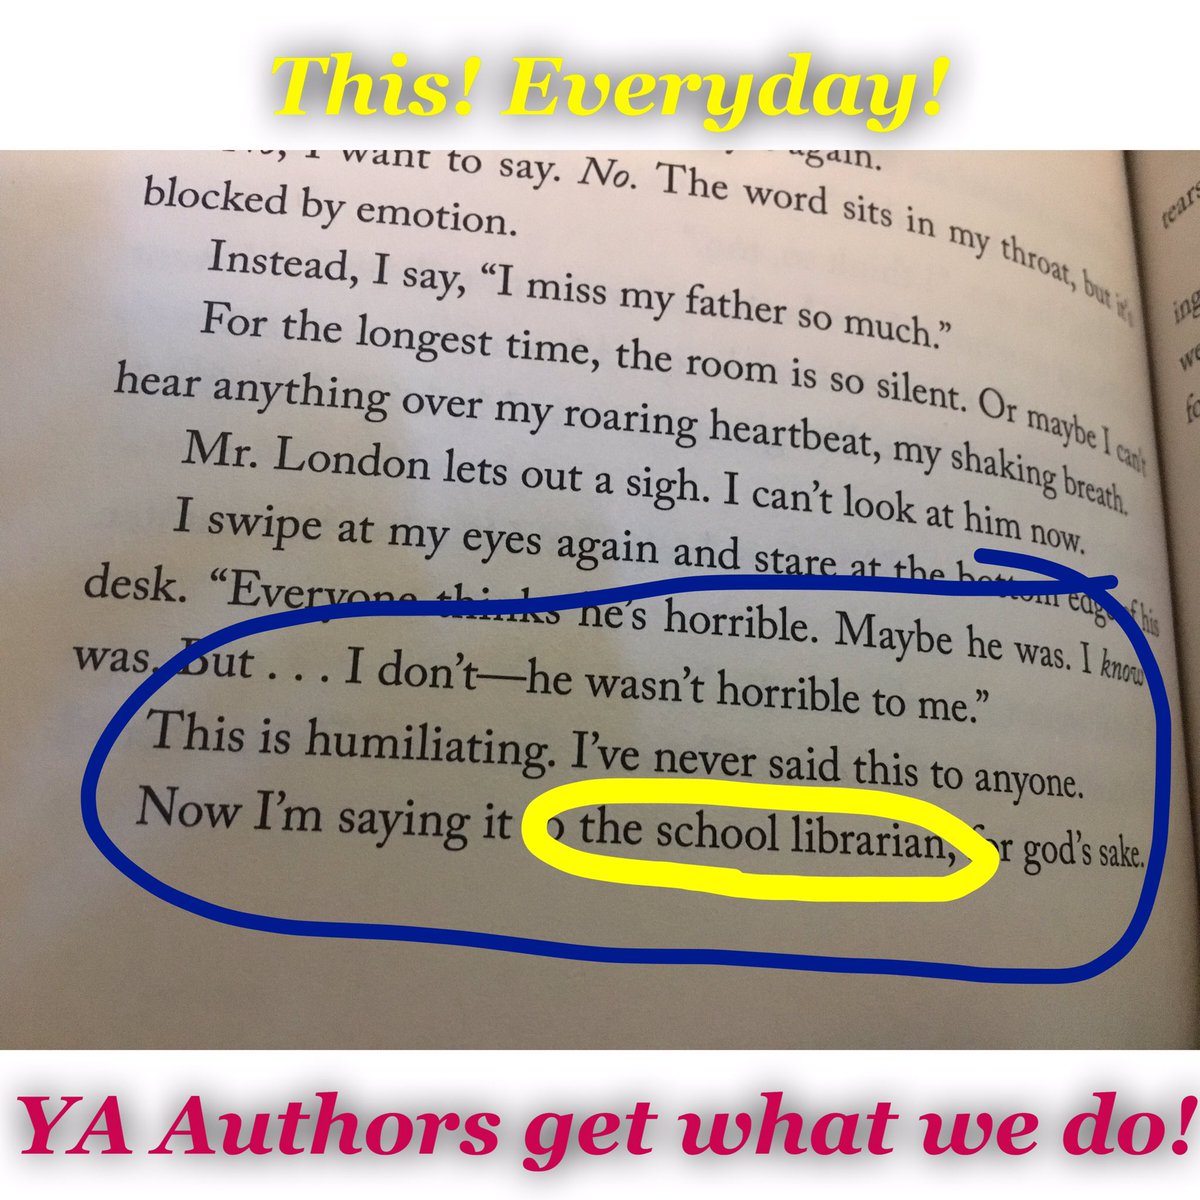 @BrigidKemmerer you get us and what we do. #schoolLibrarians #5ththrough12grades #YAAuthors #CallItWhatYouWant